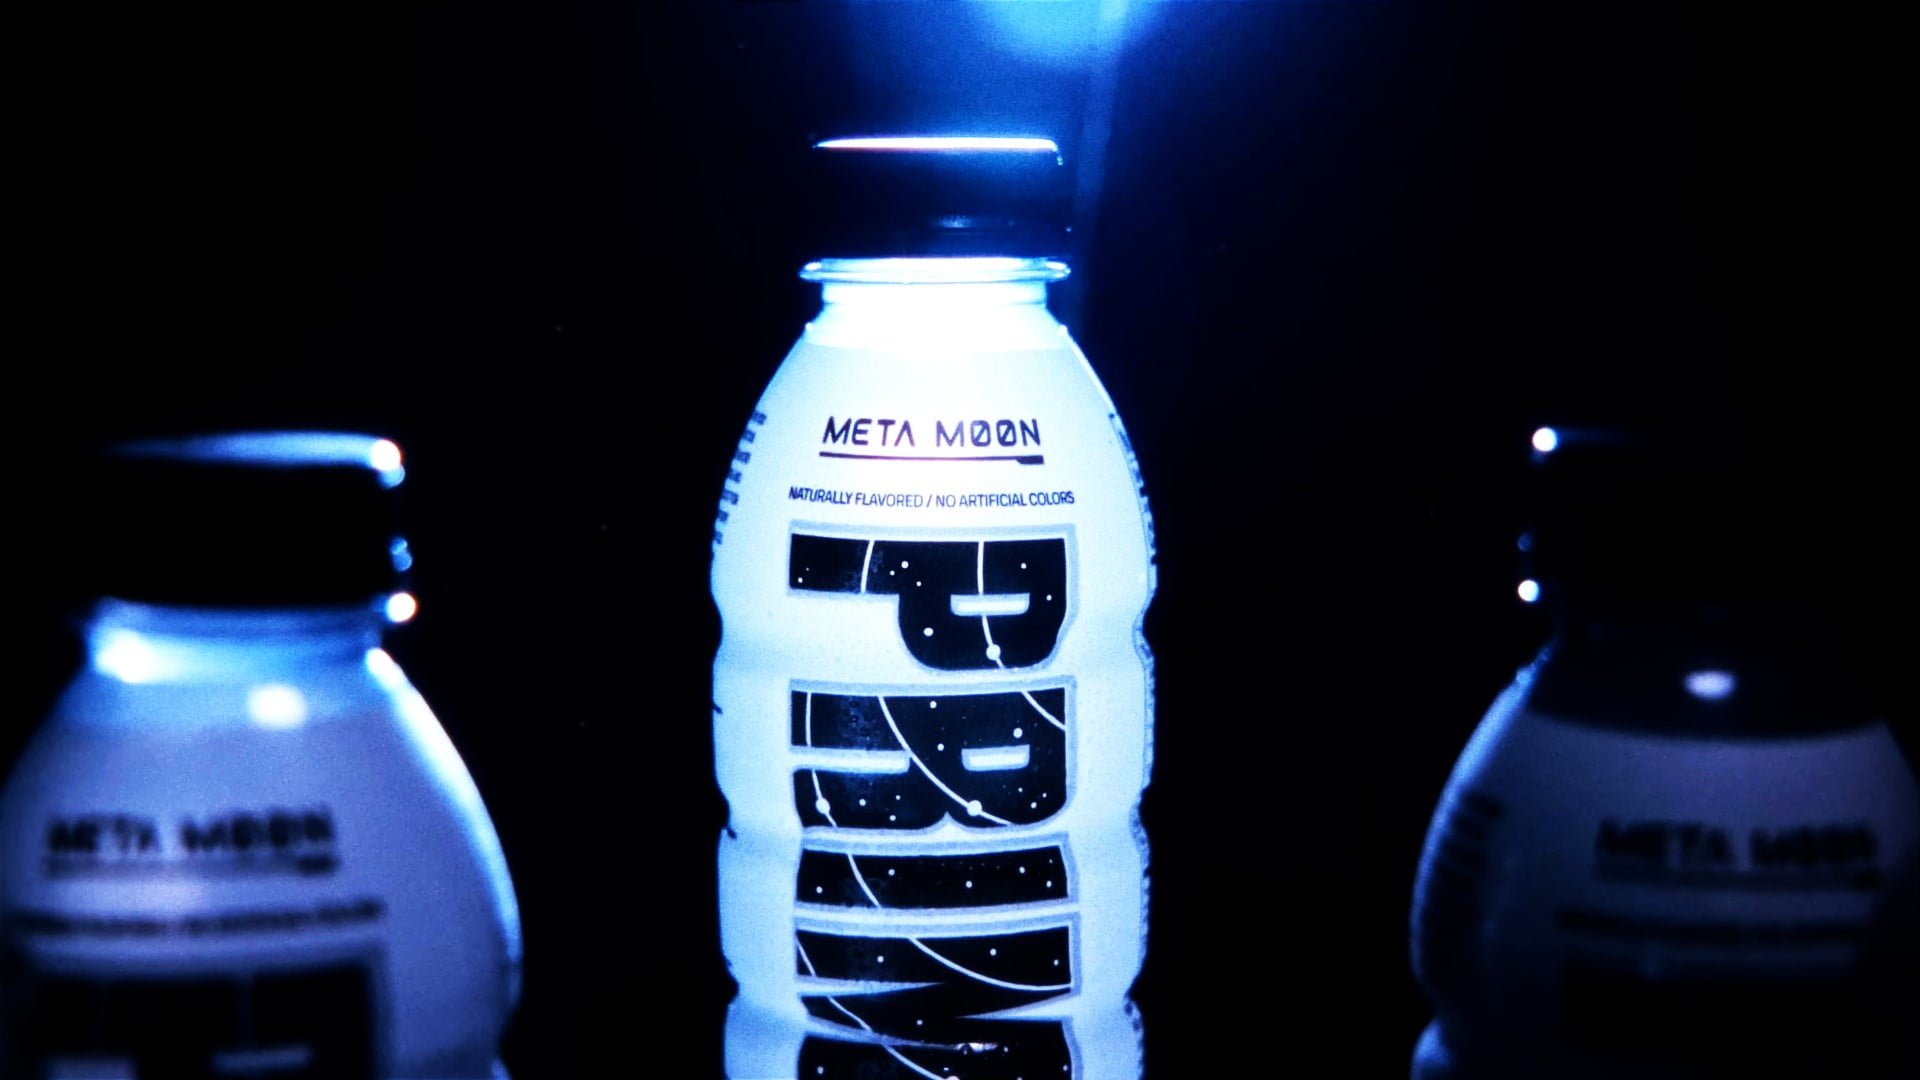 PRIME's Meta Moon Flavor Takes the Internet by Storm